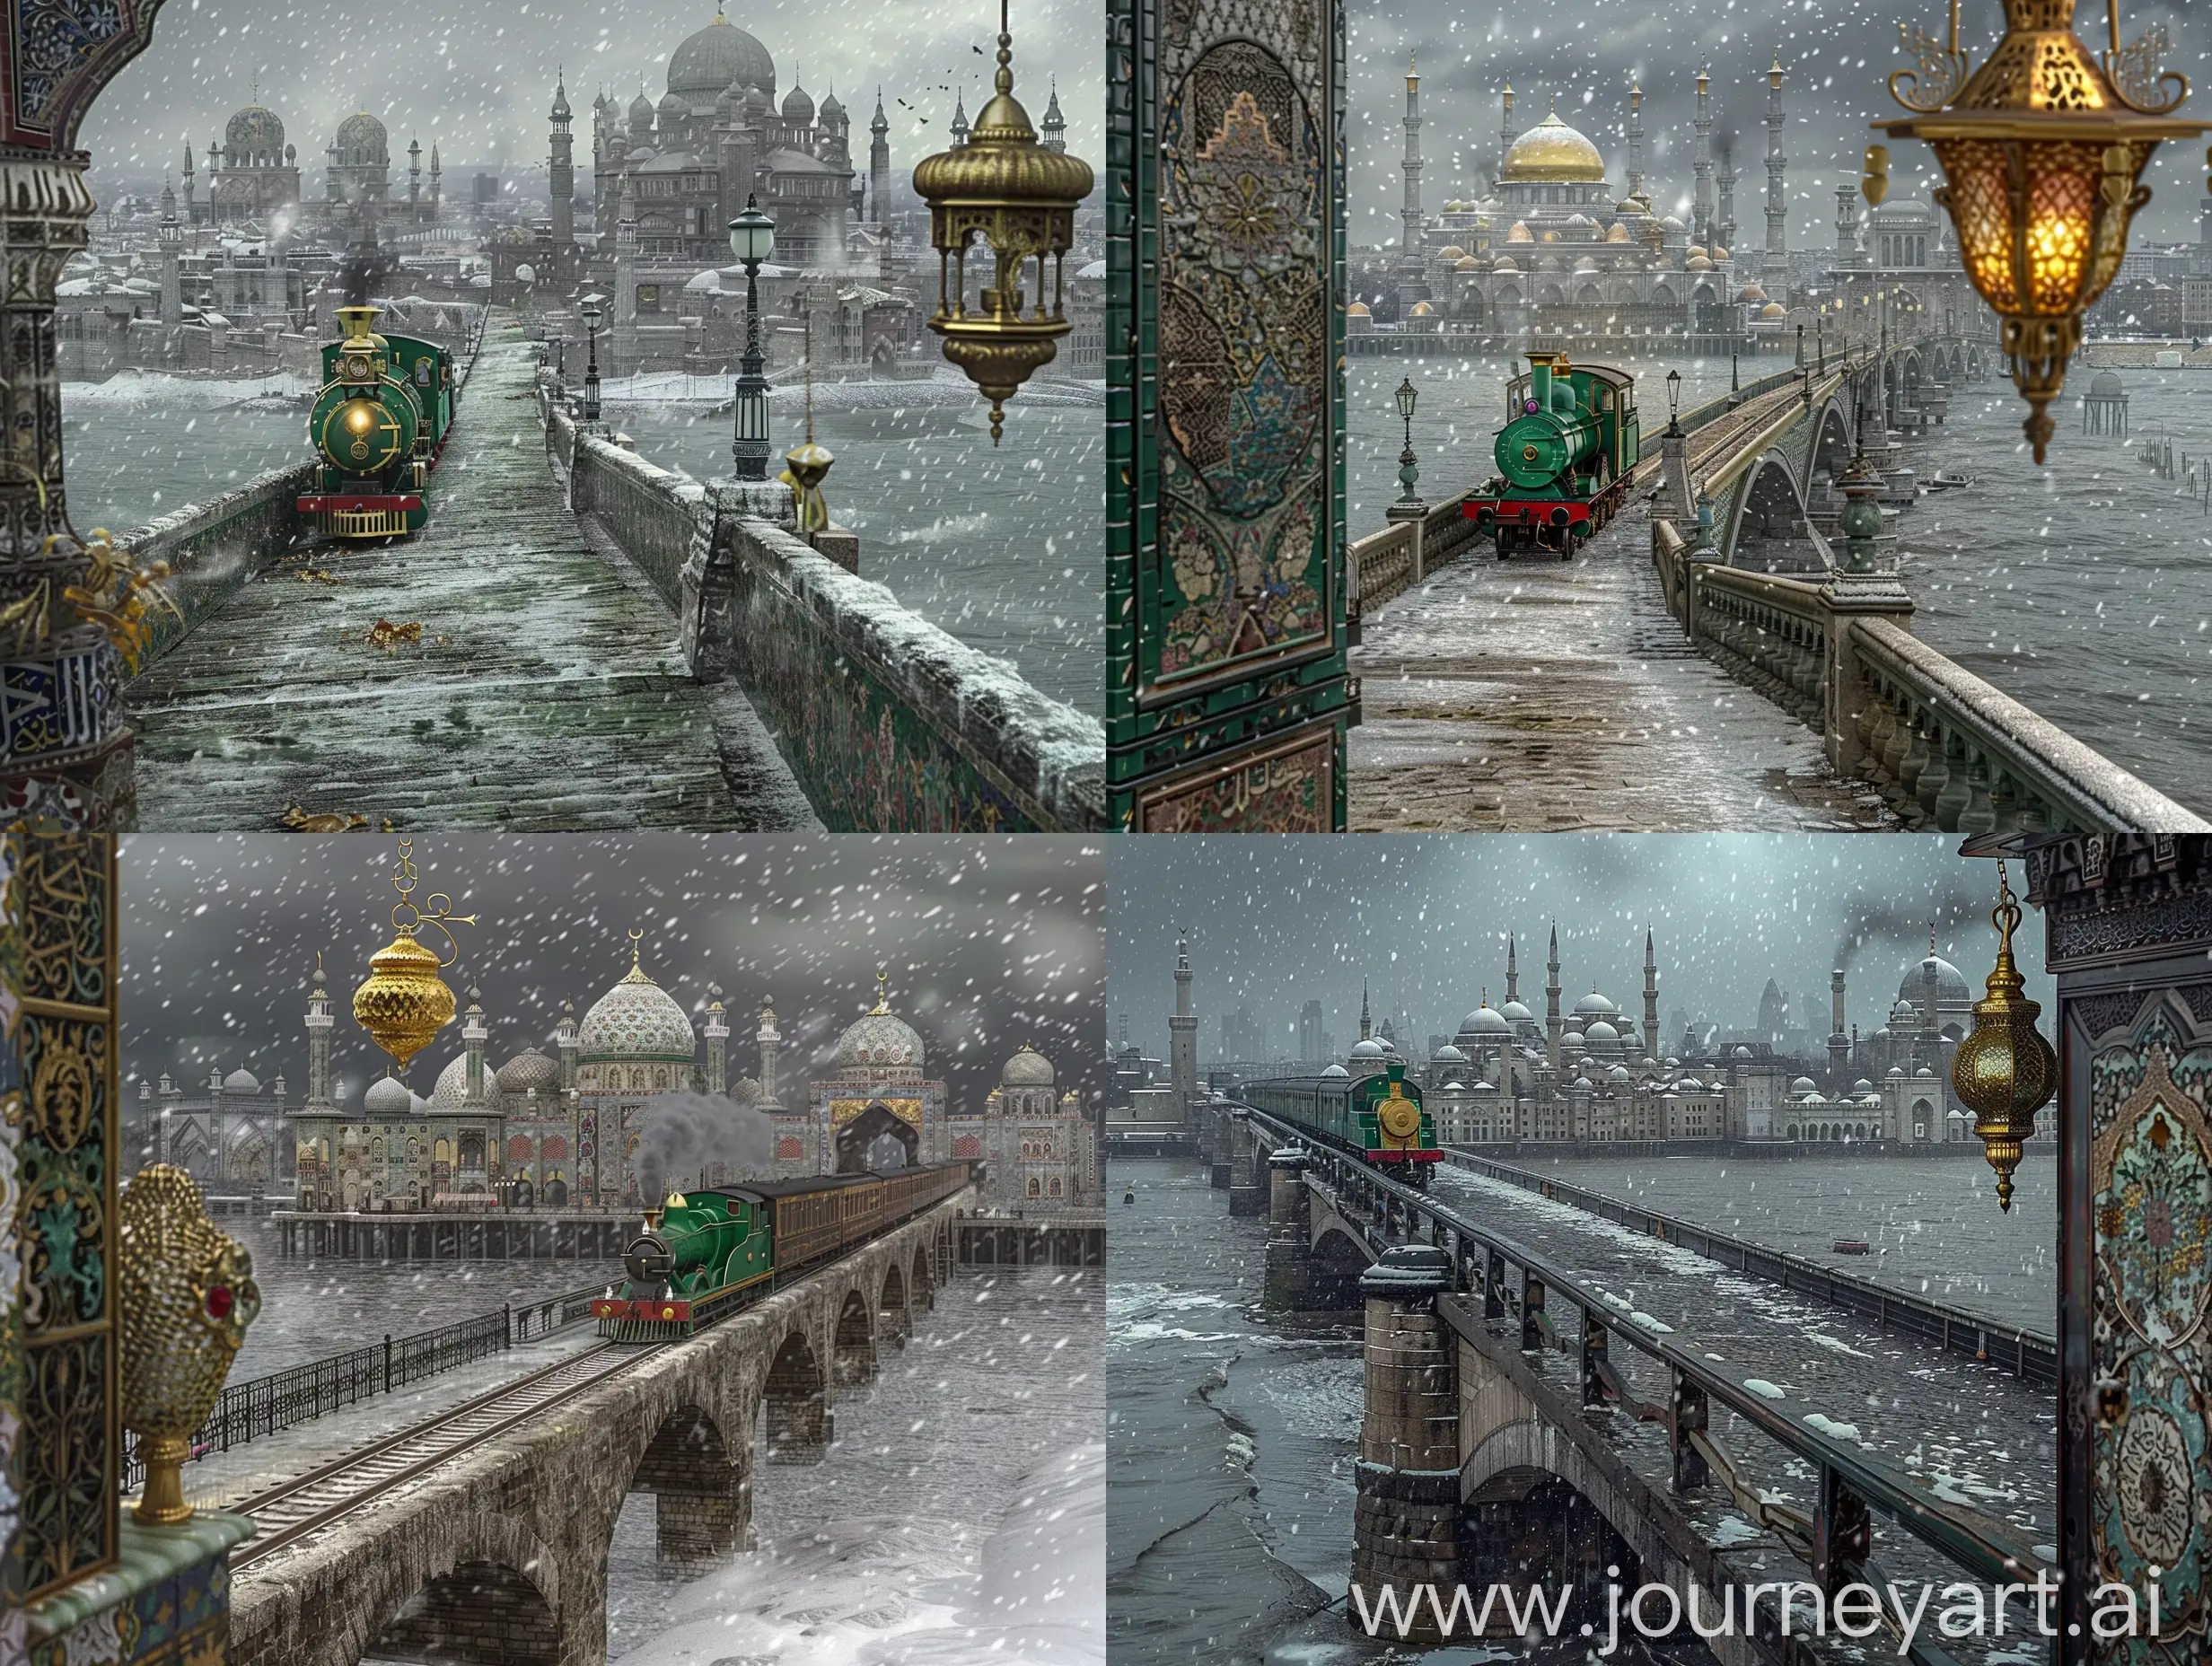 Cinematic photo: An islamic stonebridge going towards into a seafront city, a green golden steam engine train moving on the bridge towards the middle of city, in the background is the wide seafront city of floral Persian tile and timurid tile British mosques and islamic buildings and mosques, decorated with gold ornaments, dark grey dramatic weather, snowfall, a glorious islamic lamp hanging on side of the image; London styled --ar 4:3